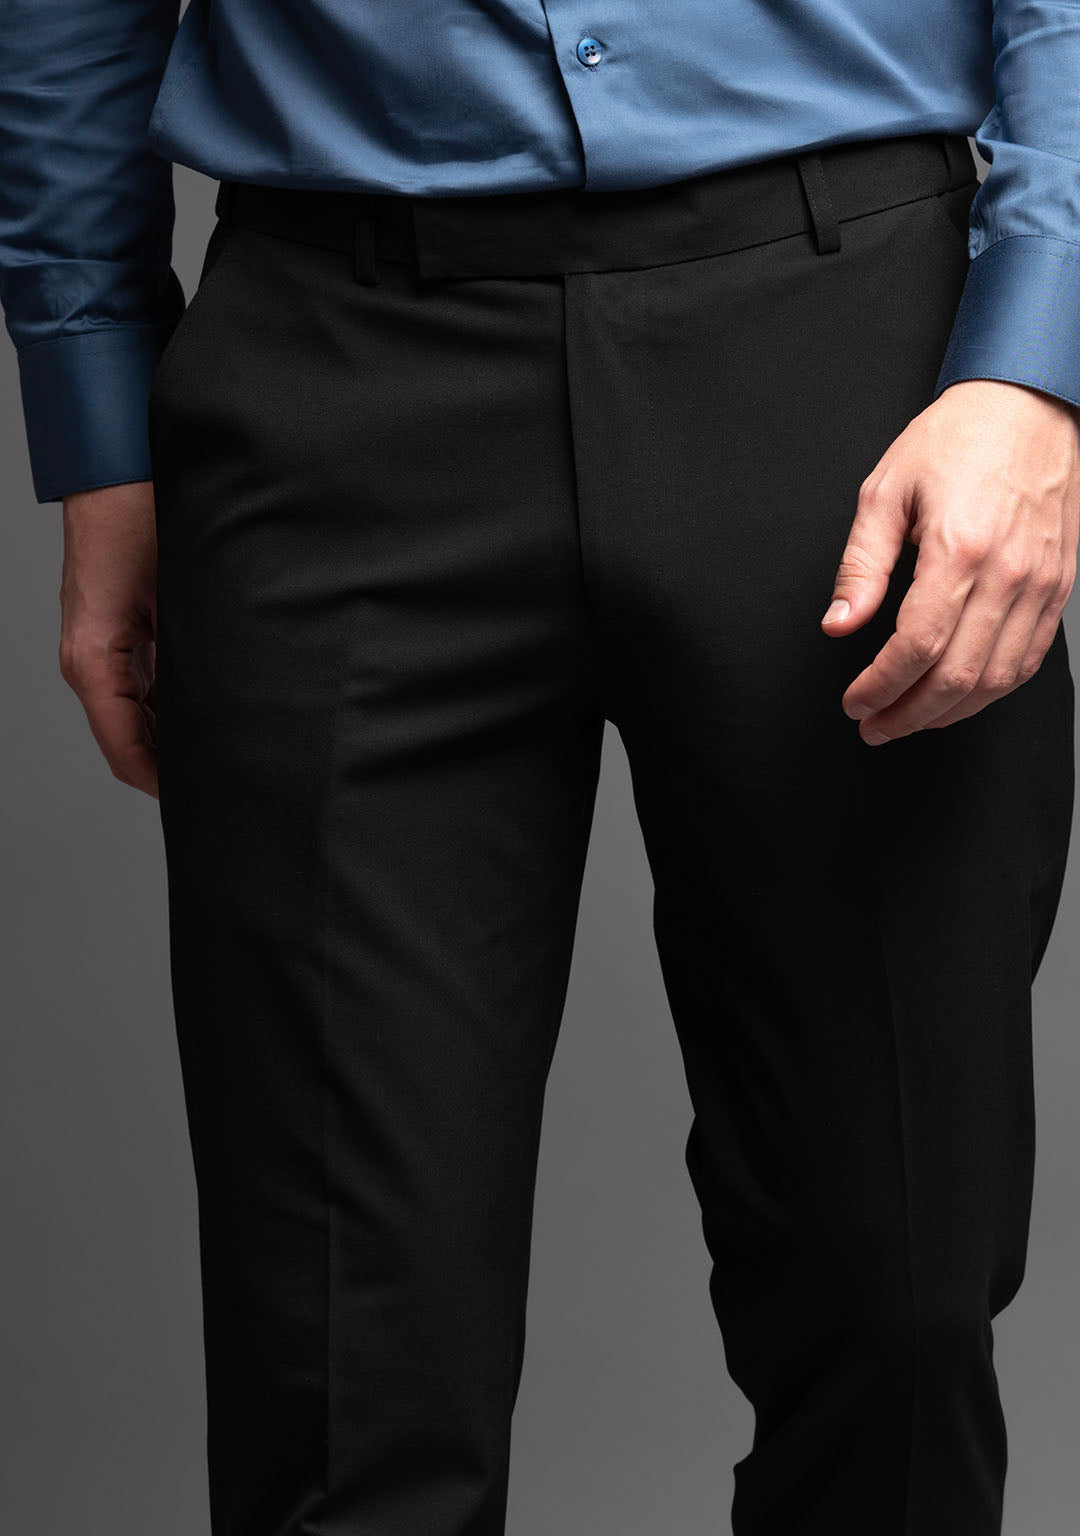 Shop Solid Formal Trousers with Pocket Detail and Belt Loops Online